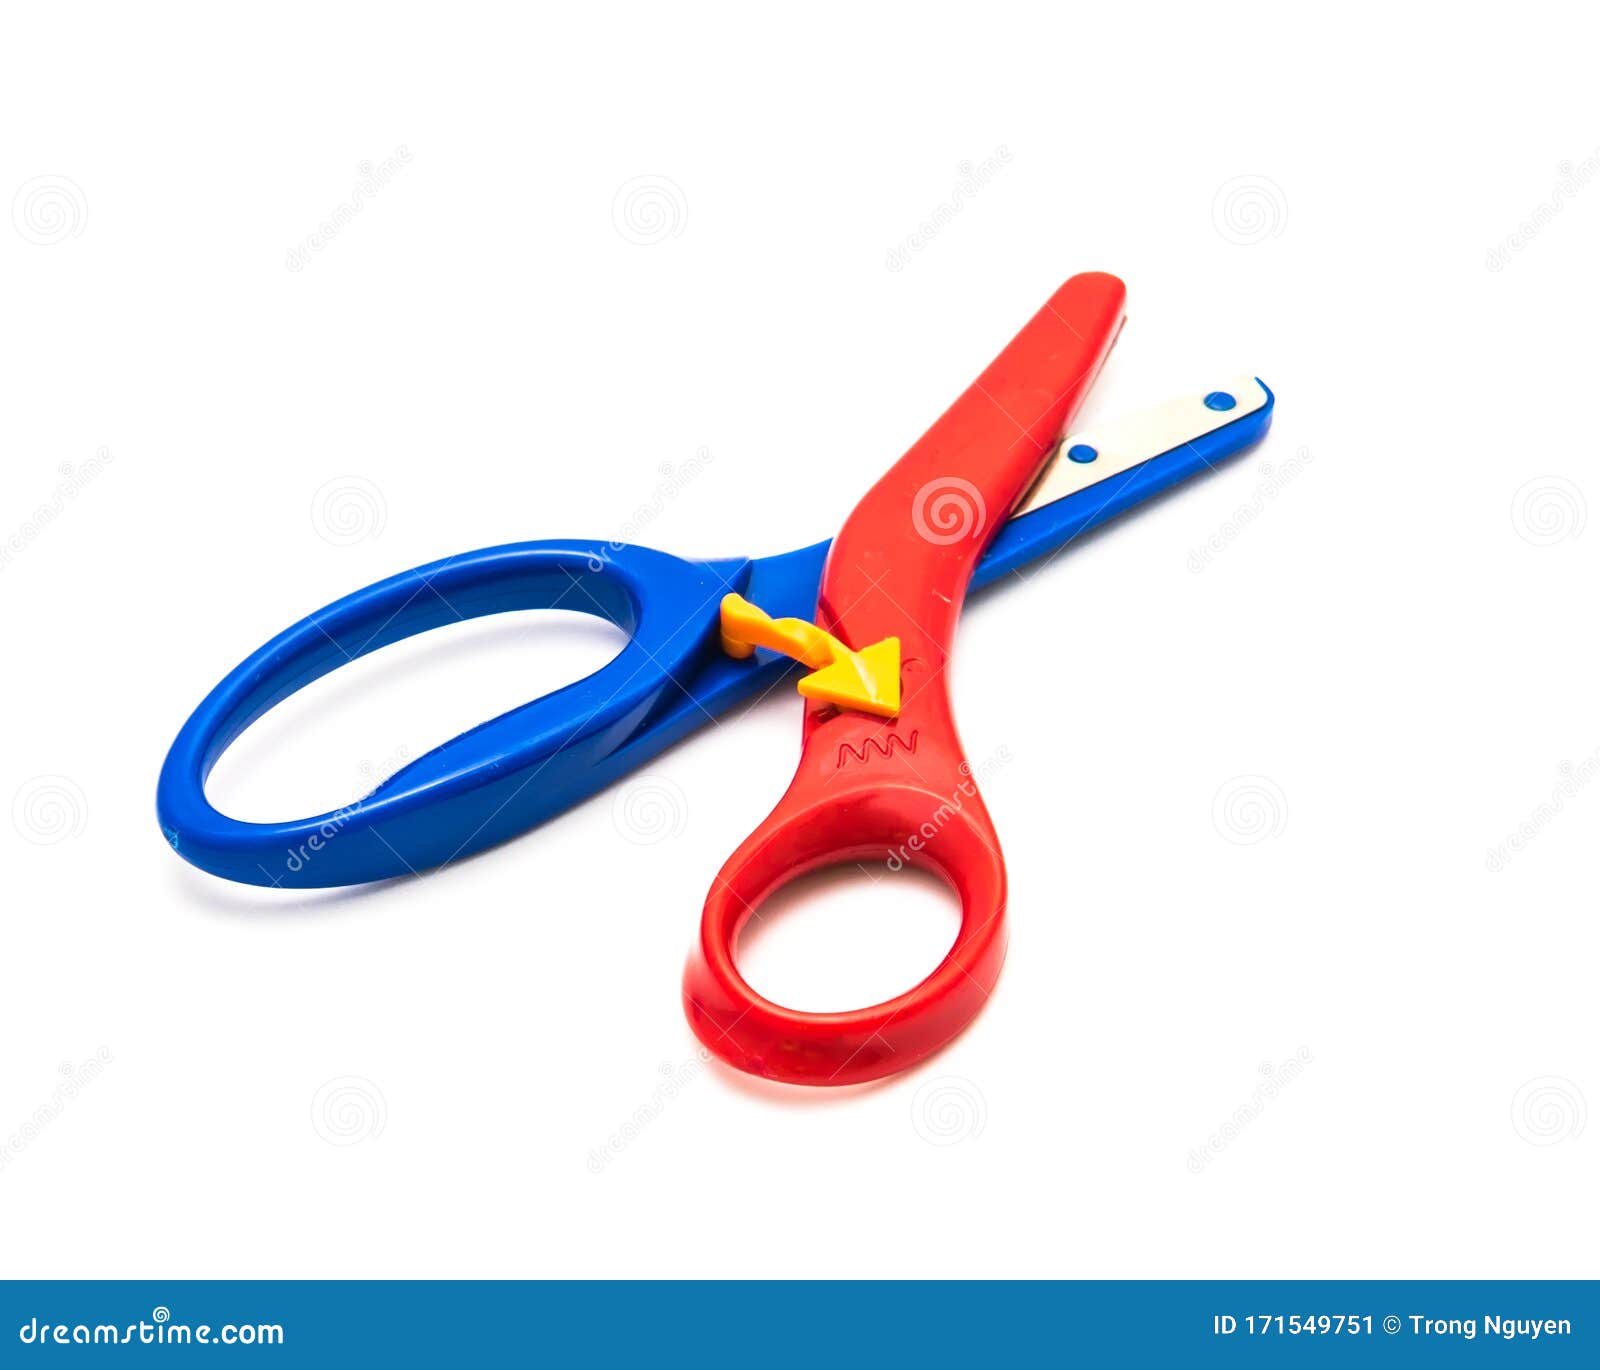 Preschool scissors with training lever for kids isolated on white